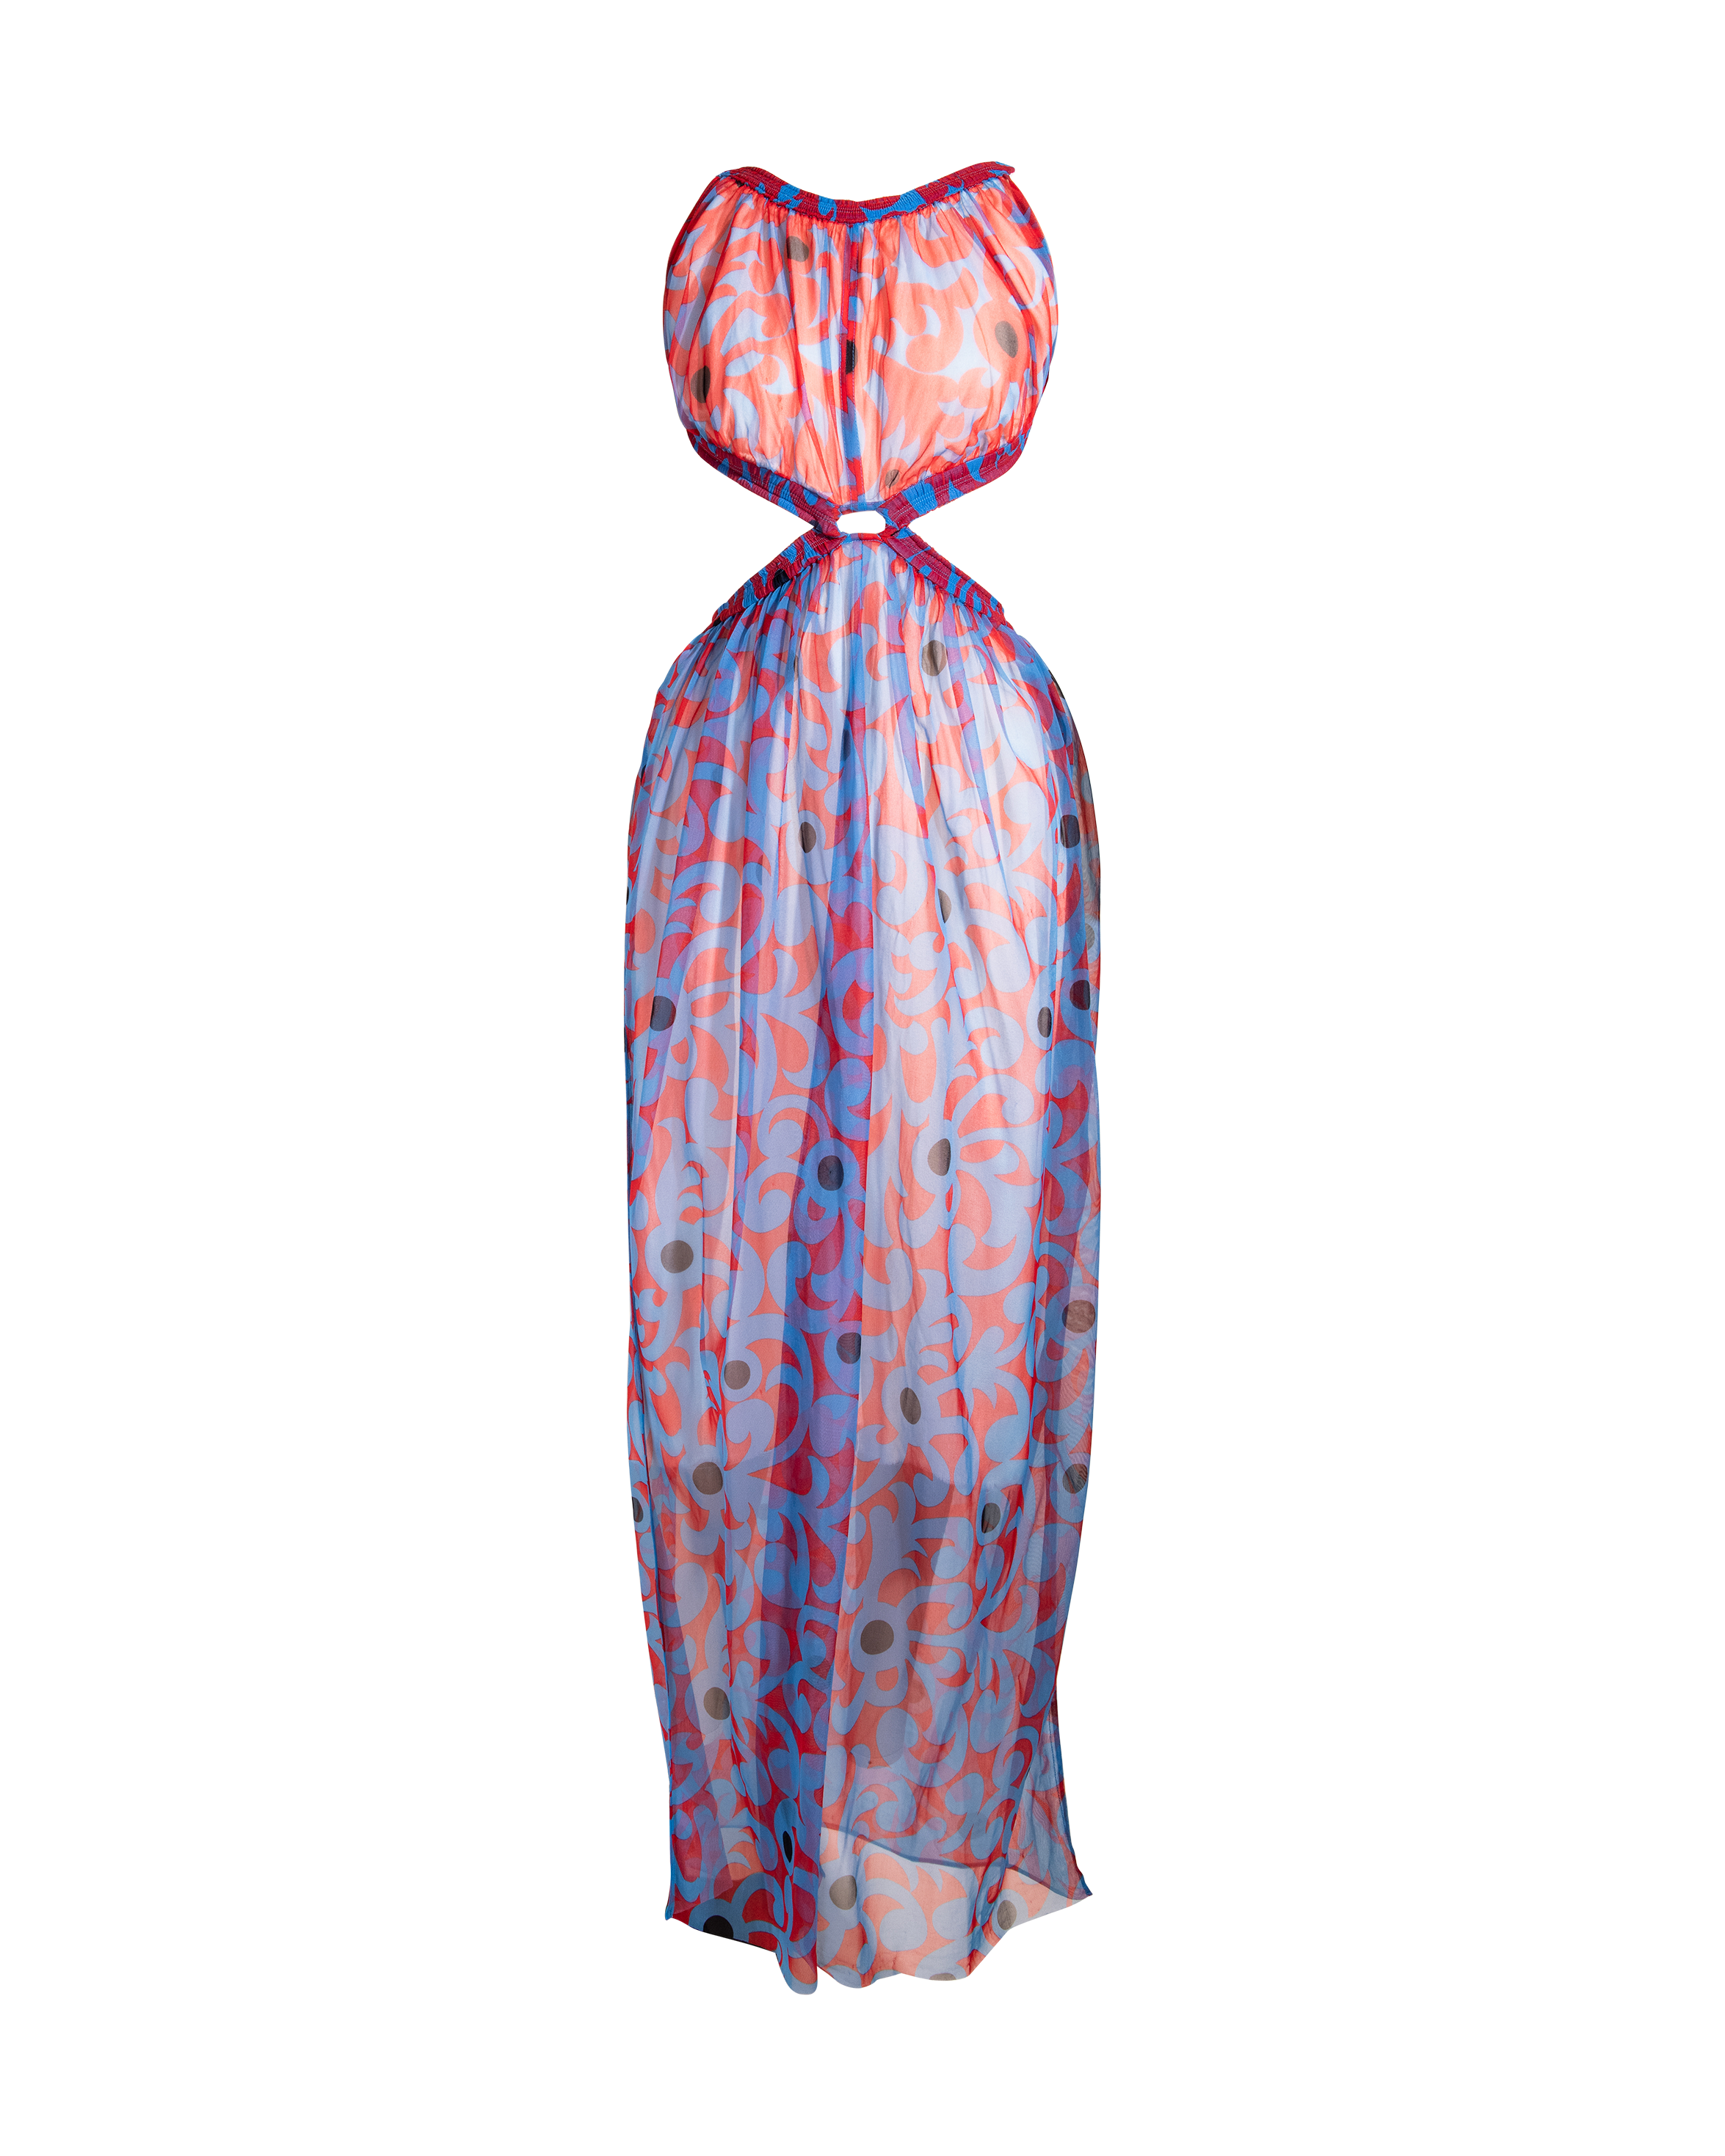 S/S 2017 Red and Blue Patterned Dress with Side Cutouts